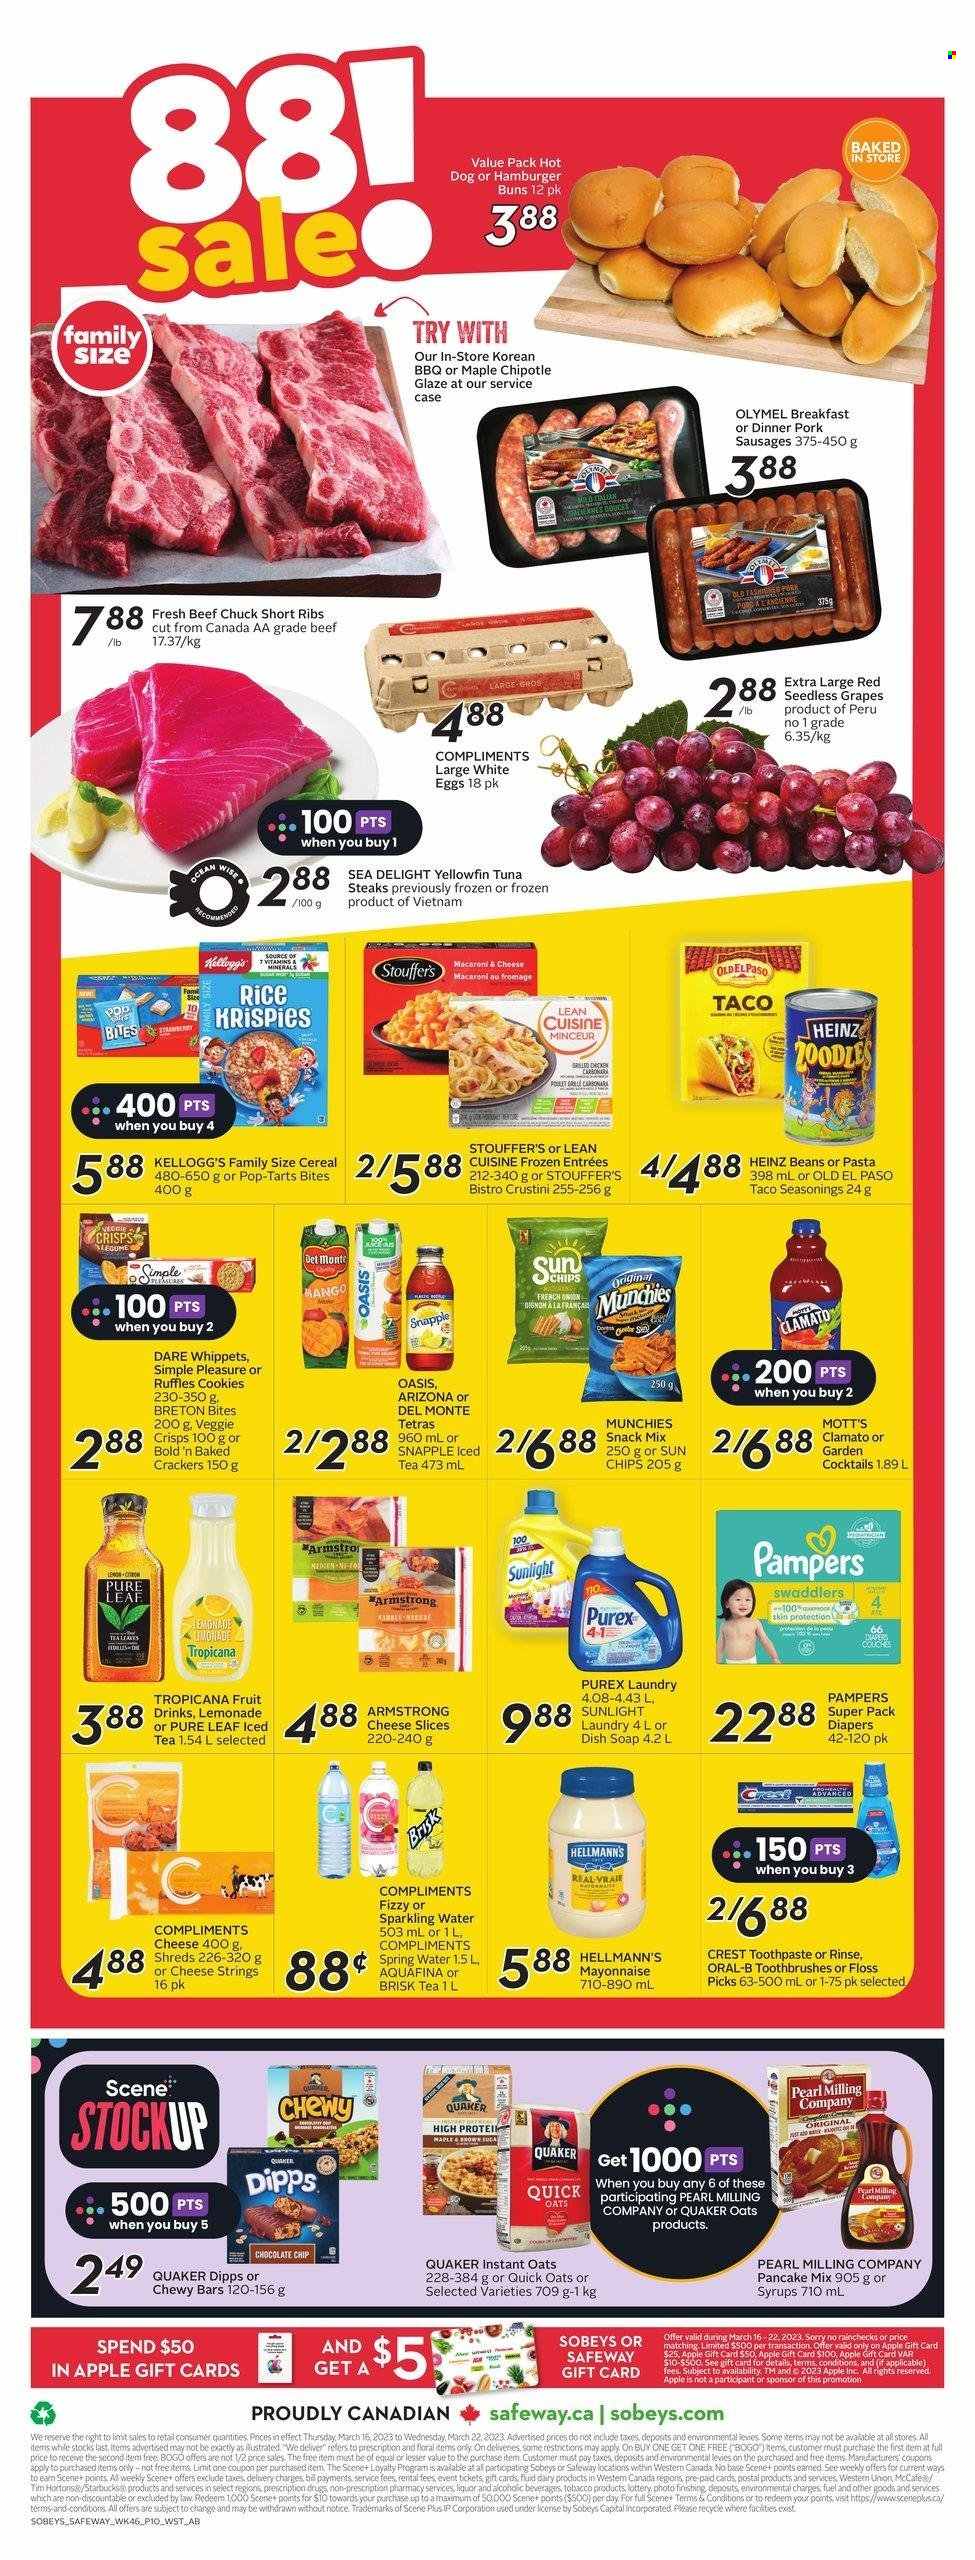 thumbnail - Sobeys Flyer - March 16, 2023 - March 22, 2023 - Sales products - buns, Old El Paso, burger buns, beans, onion, grapes, seedless grapes, Mott's, tuna, macaroni & cheese, hot dog, pancakes, Quaker, Lean Cuisine, sausage, sliced cheese, eggs, mayonnaise, Hellmann’s, Stouffer's, cookies, chocolate chips, snack, crackers, Kellogg's, Pop-Tarts, Ruffles, oats, Del Monte, cereals, Rice Krispies, Quick Oats, lemonade, ice tea, Clamato, AriZona, Snapple, Aquafina, spring water, sparkling water, water, Pure Leaf, Starbucks, McCafe, liquor, beef ribs, steak, ribs, Pampers, nappies, Sunlight, Purex, soap, toothpaste, Crest, Heinz, Oral-B. Page 2.